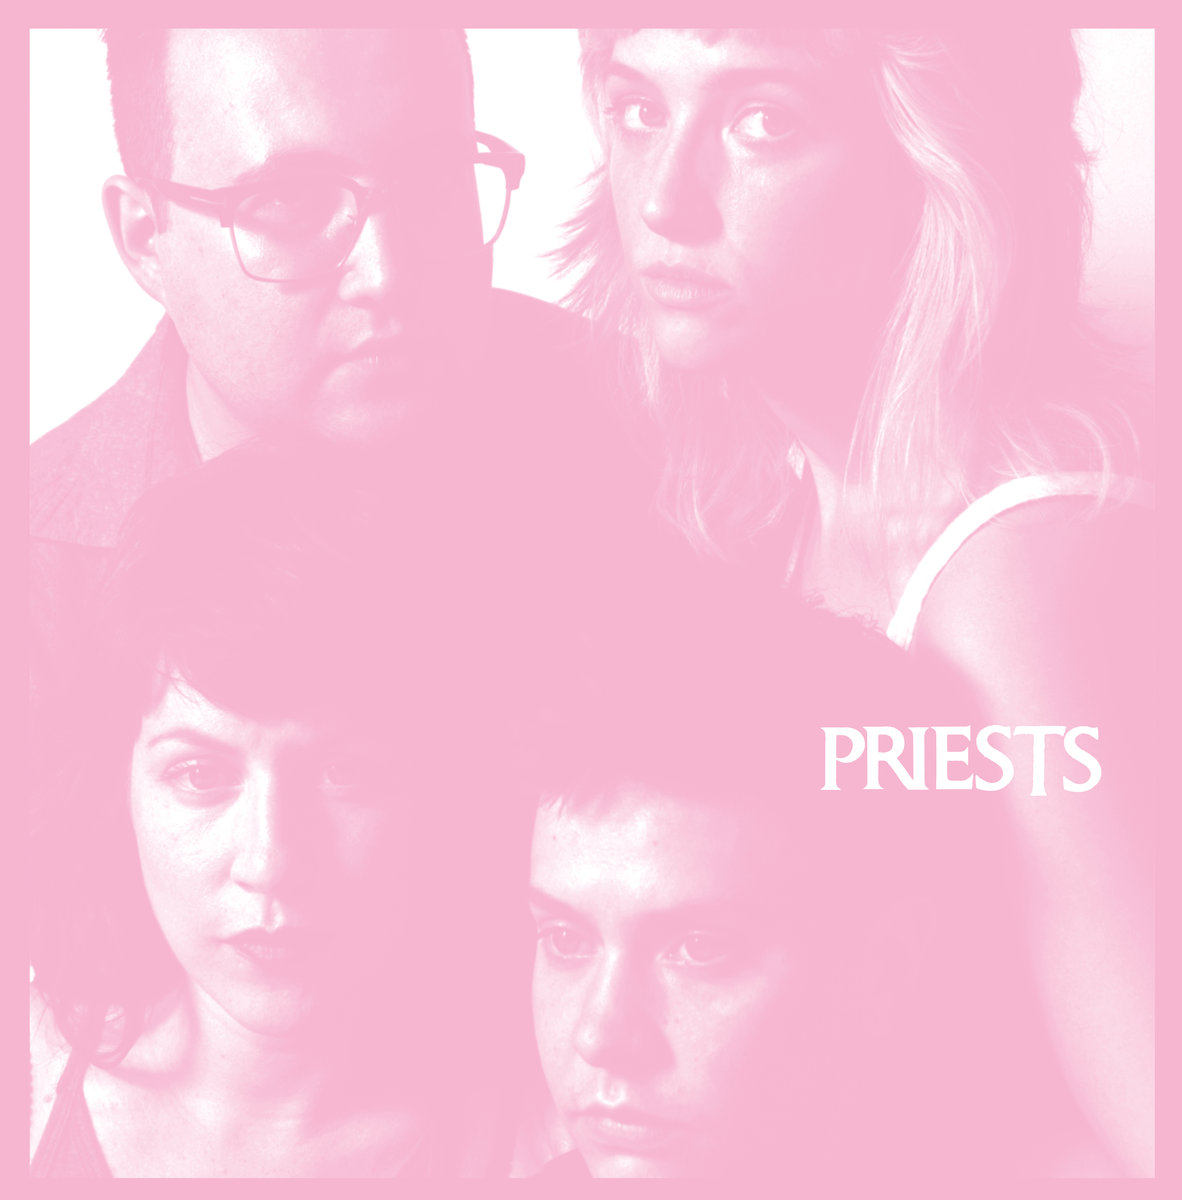 Album Review: Priests – Nothing Feels Natural